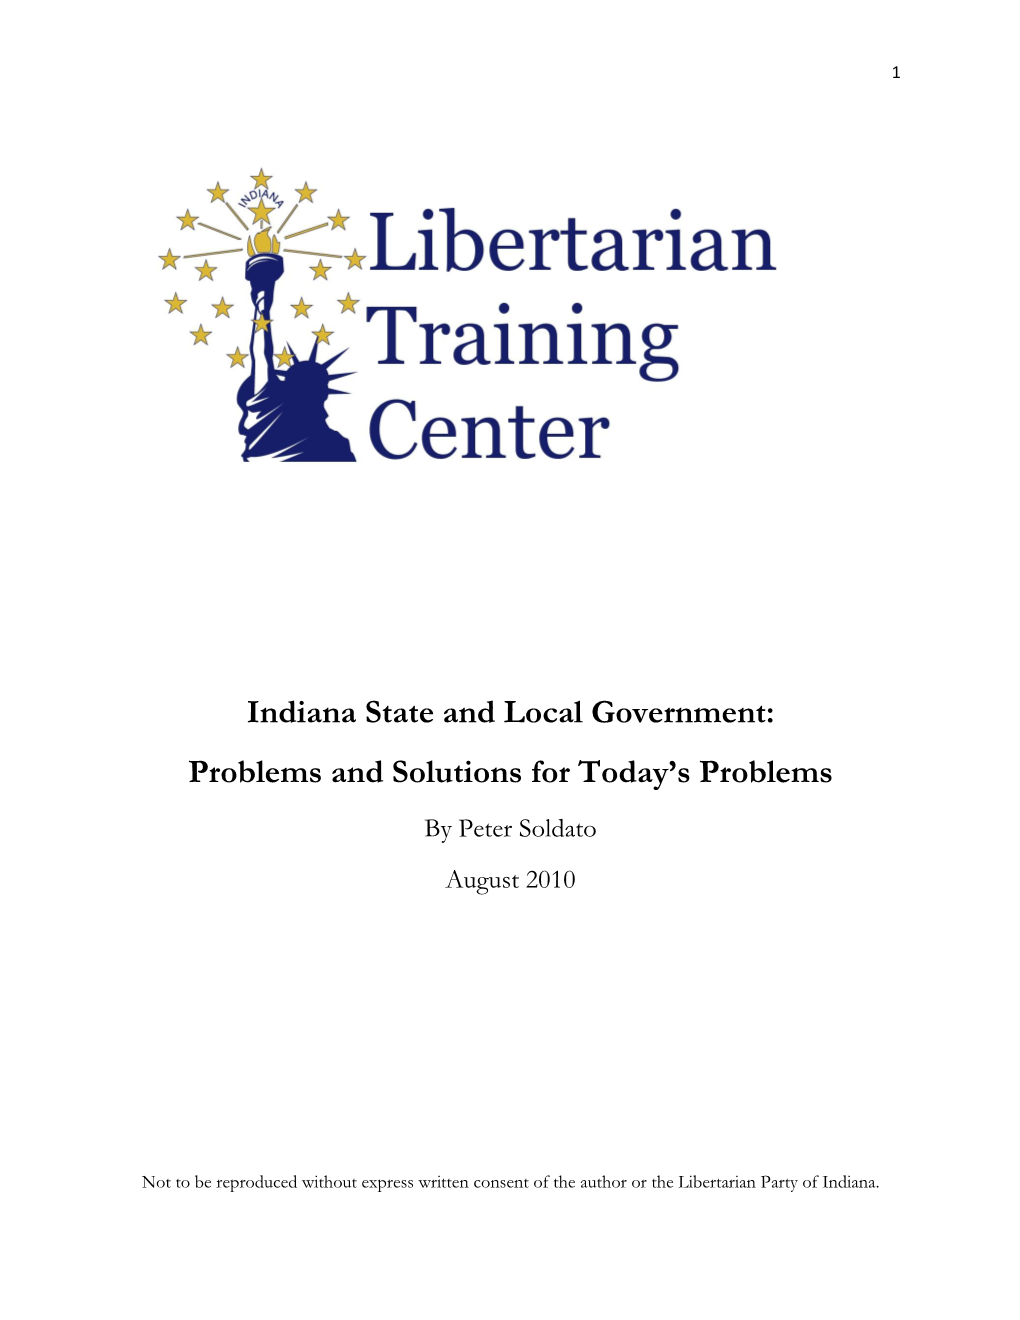 Indiana State and Local Government: Problems and Solutions for Today’S Problems by Peter Soldato August 2010